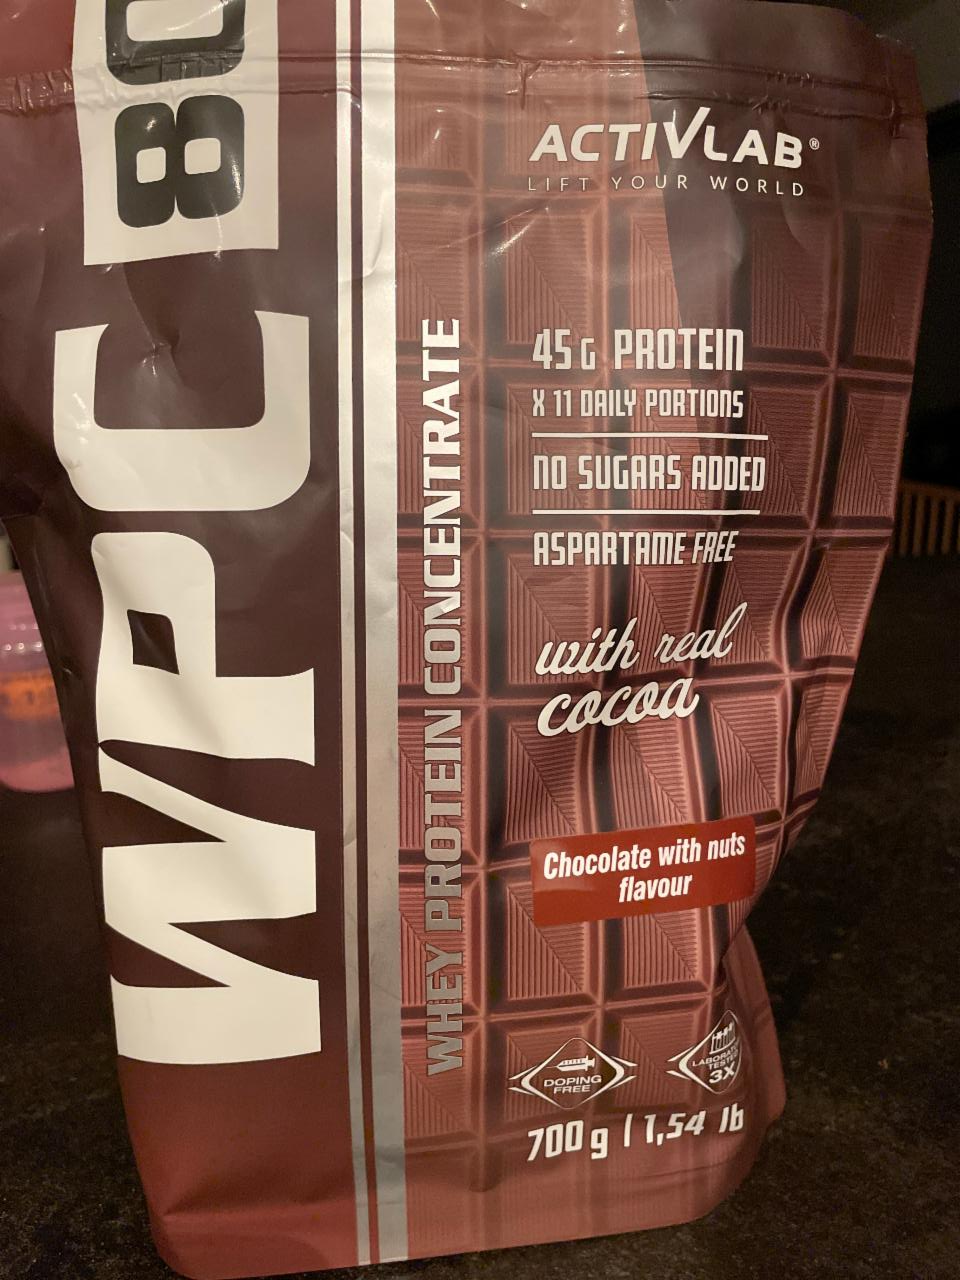 Fotografie - WPC 80 Whey protein concentrate chocolate with nuts flavour Activlab